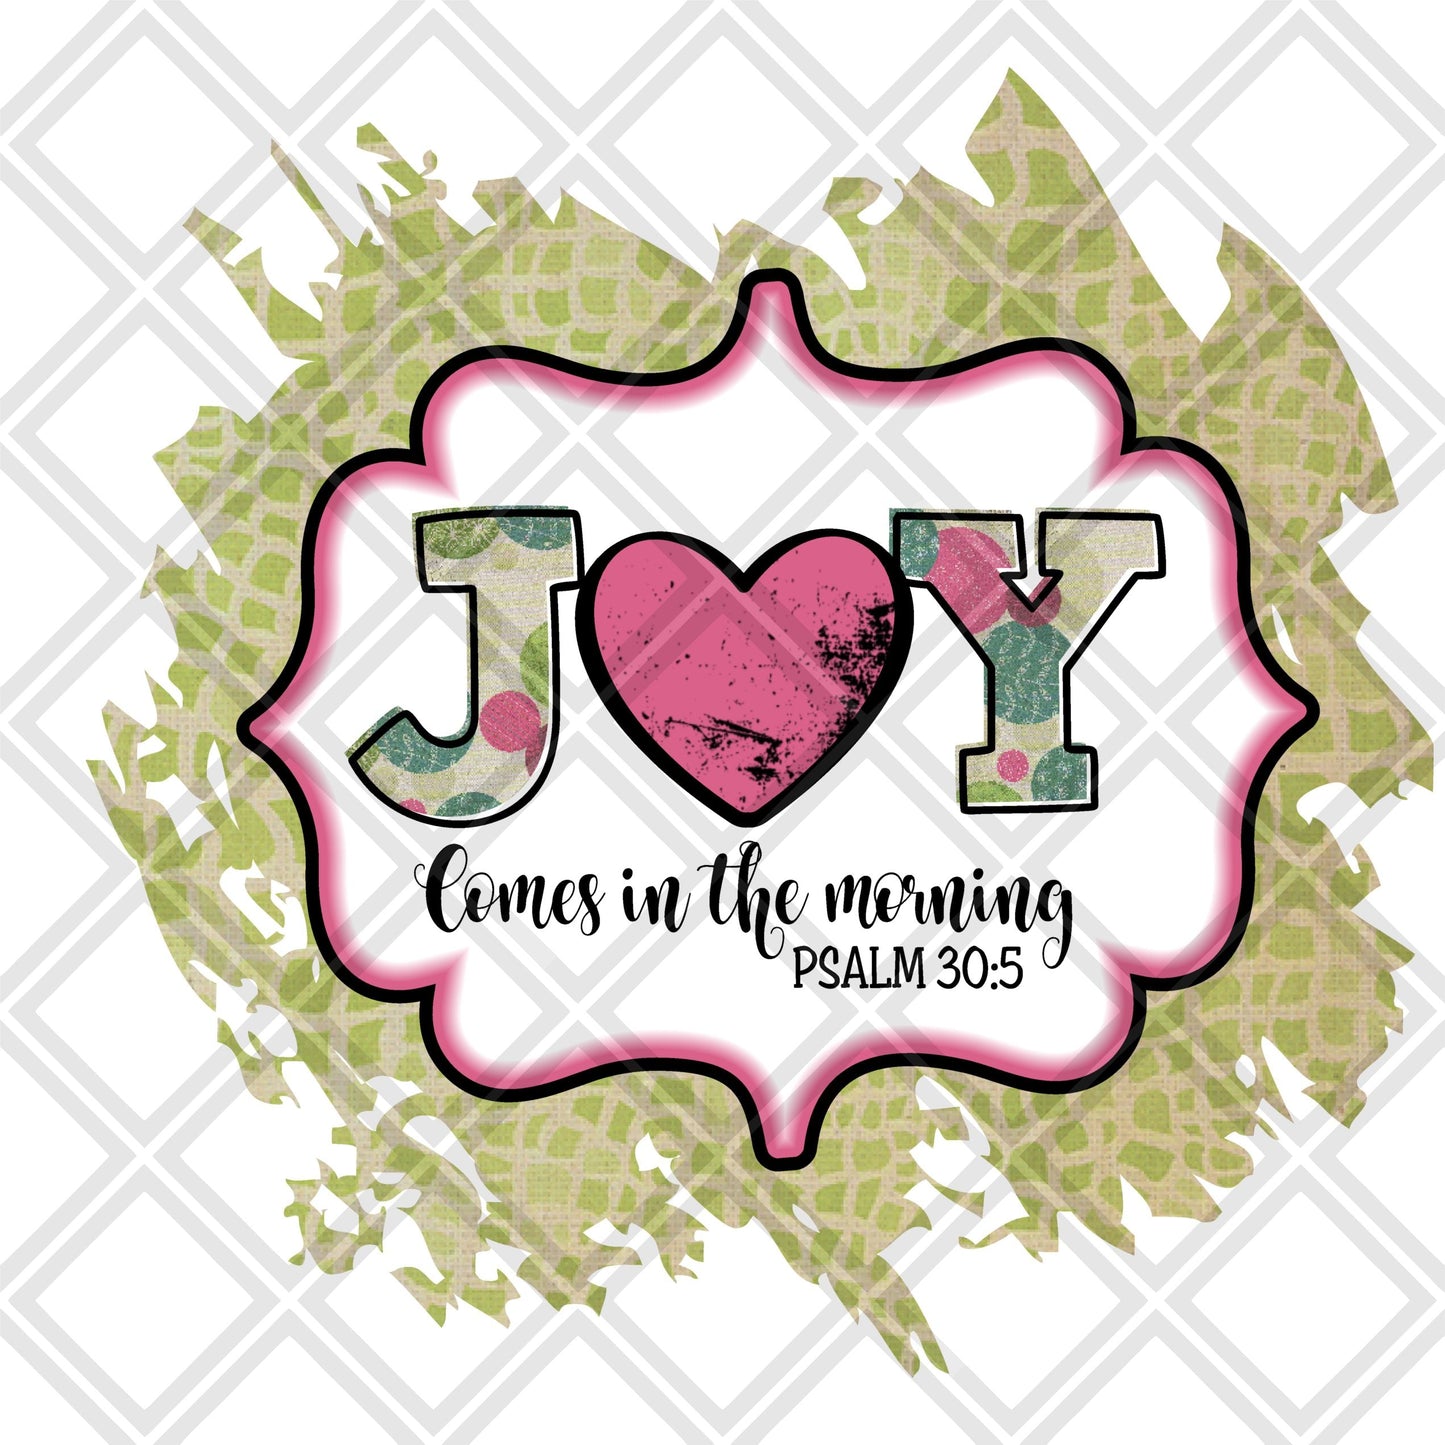 Joy comes in the morning DTF TRANSFERPRINT TO ORDER